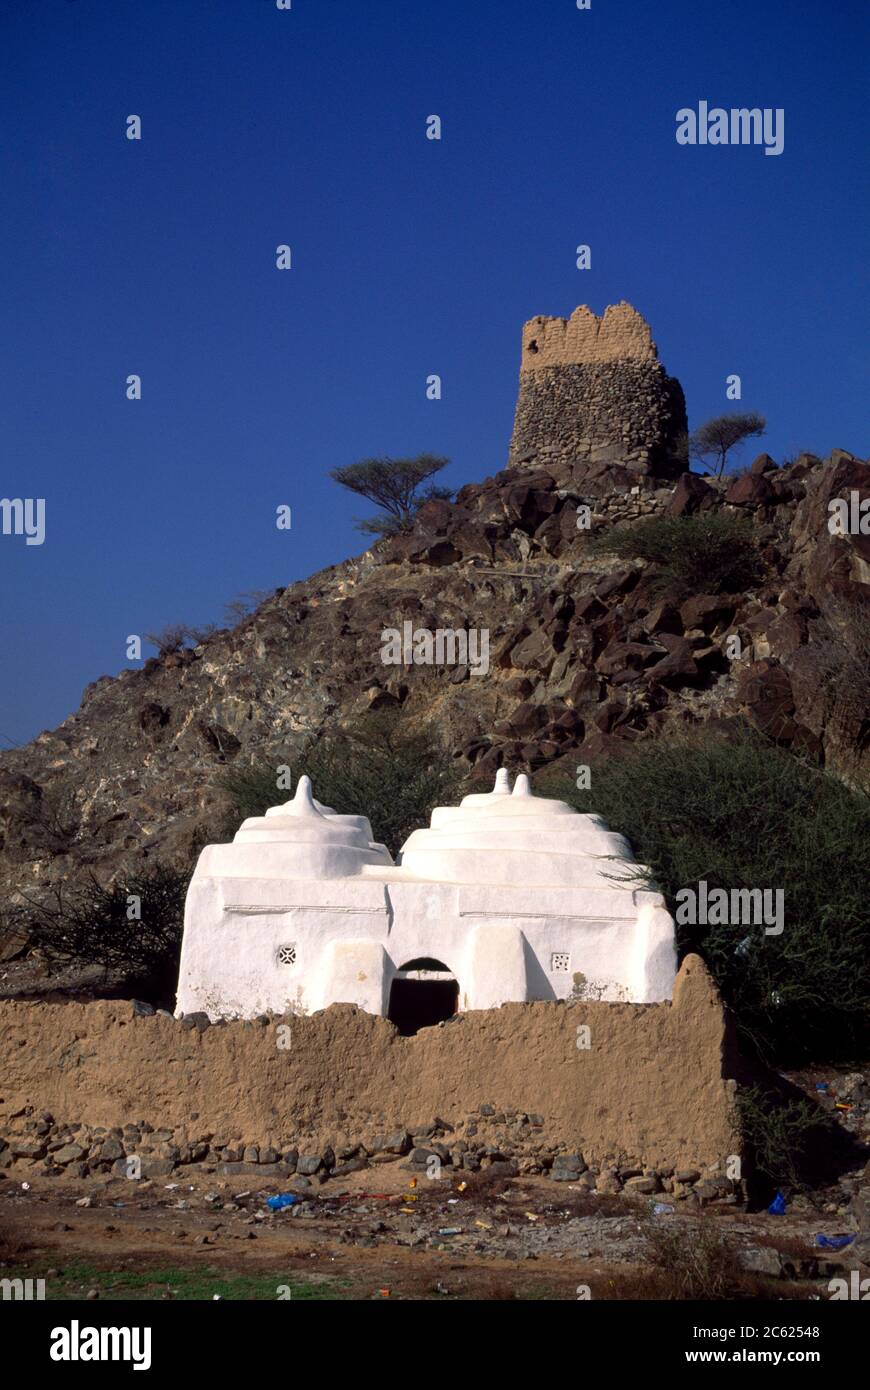 Fujairah UAE Al Bidyah Mosque 15th Century oldest working Mosque in the UAE with Four Domed Roof and Watchtower overlooking the Mosque Stock Photo